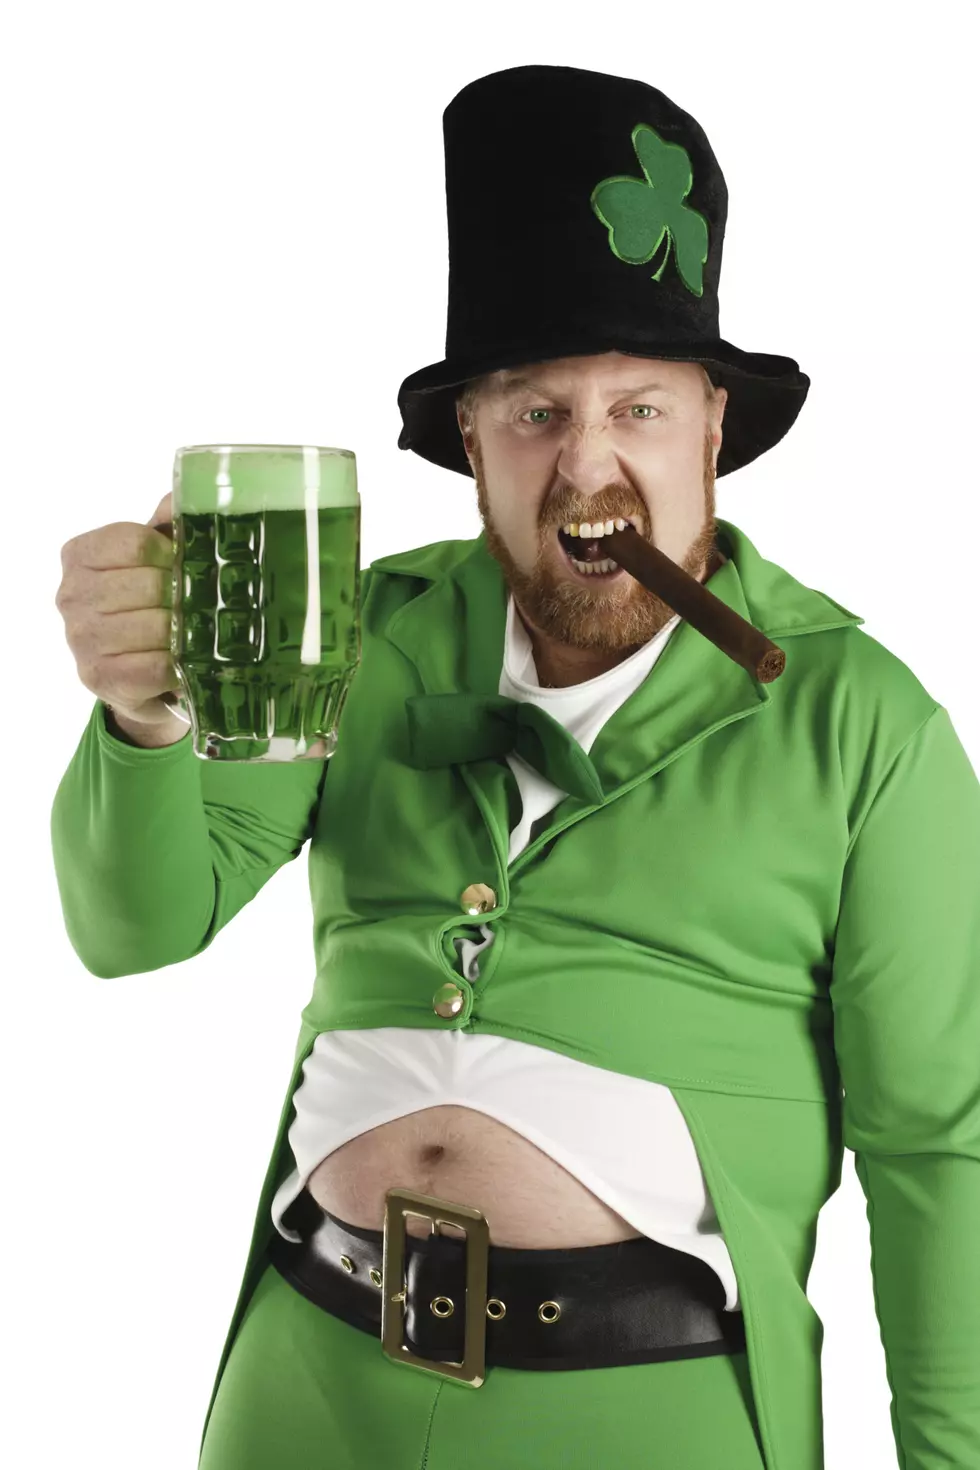 Wear Your St. Patty’s Day Best and Win